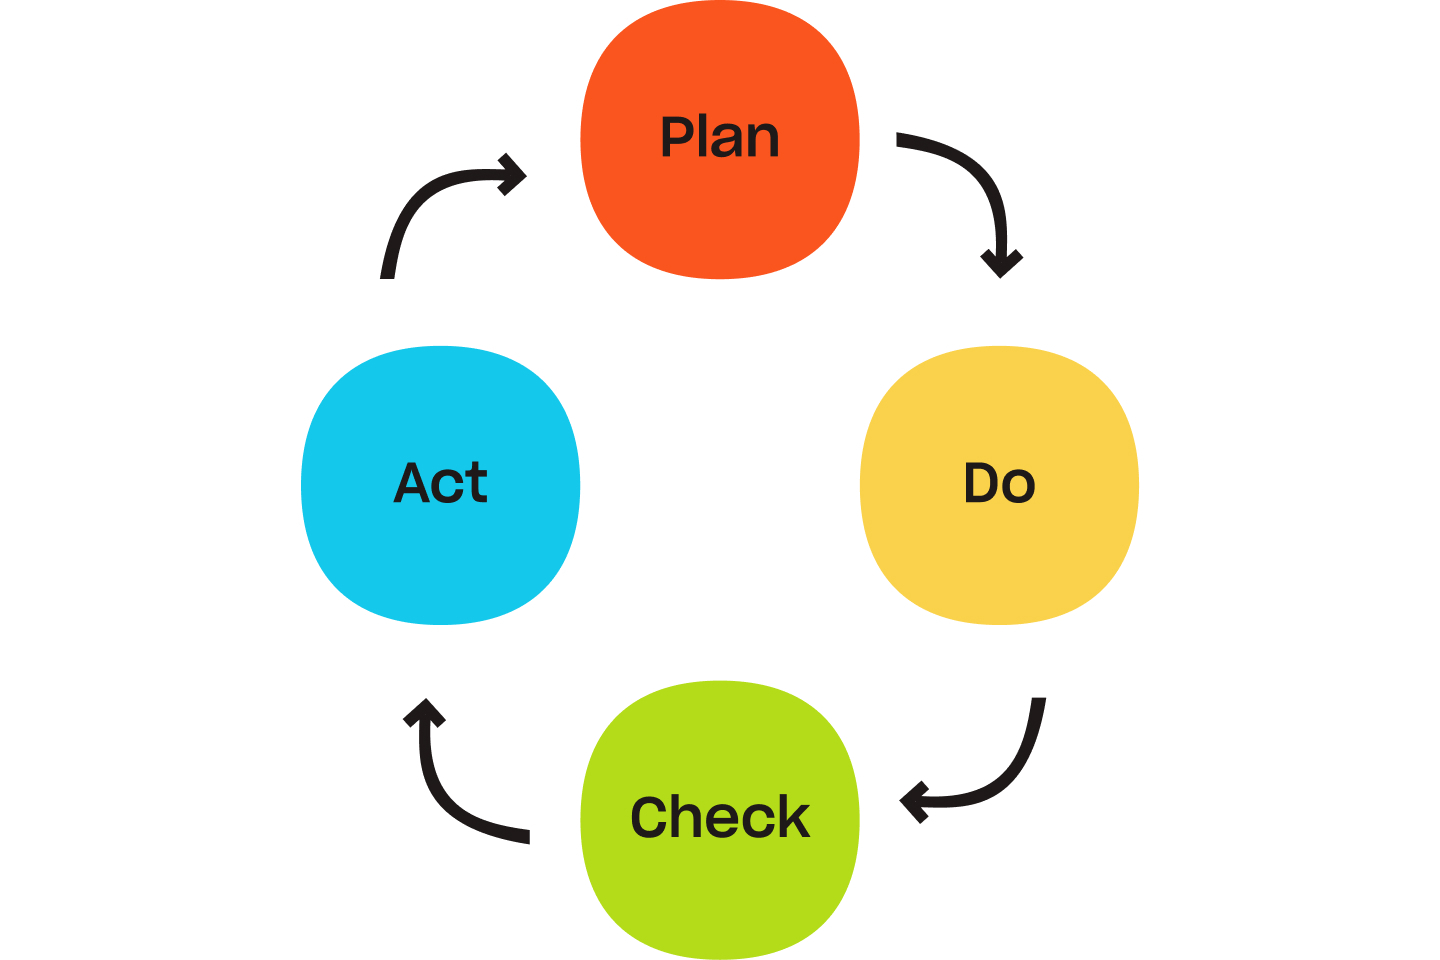 A Plan, Do, Check, Act cycle, which shows a a continuous loop of planning, doing, checking, and acting.